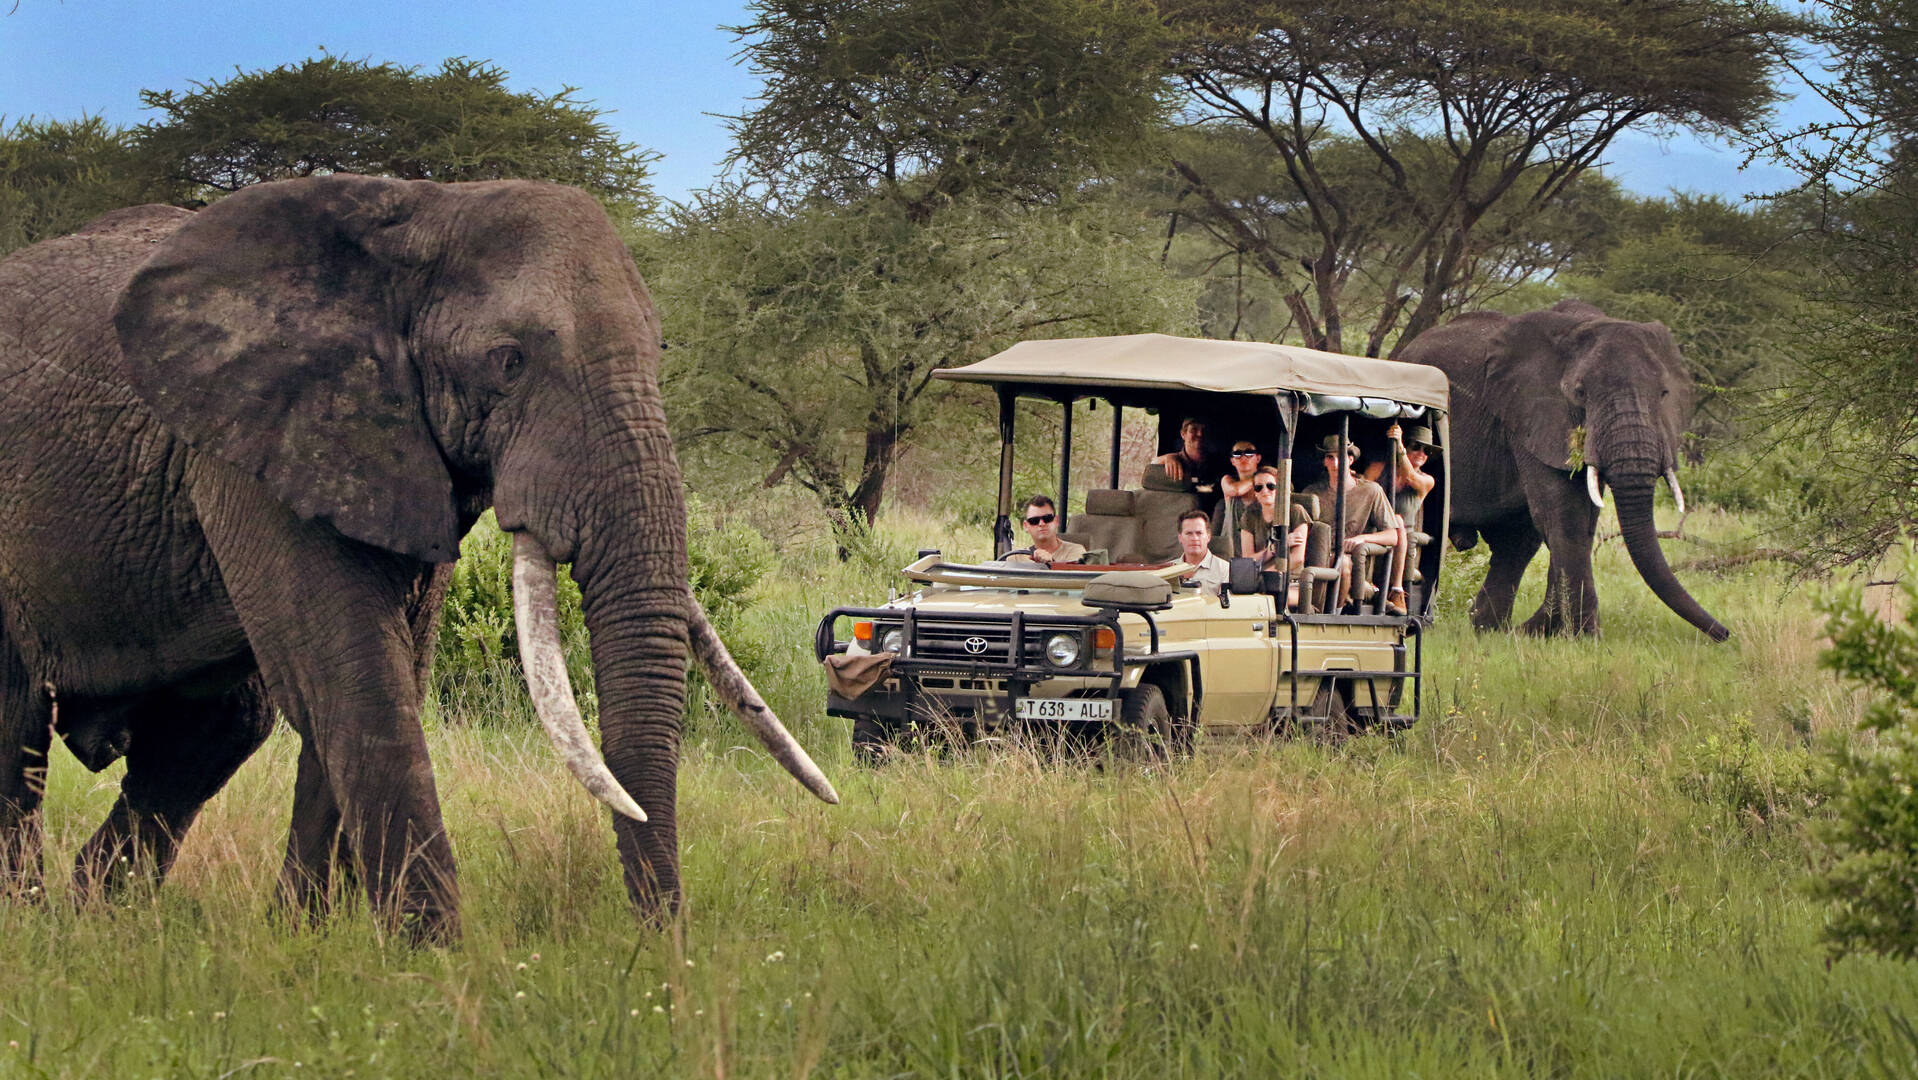 Enjoy a holiday in northern Tanzania with a private expert safari guide.